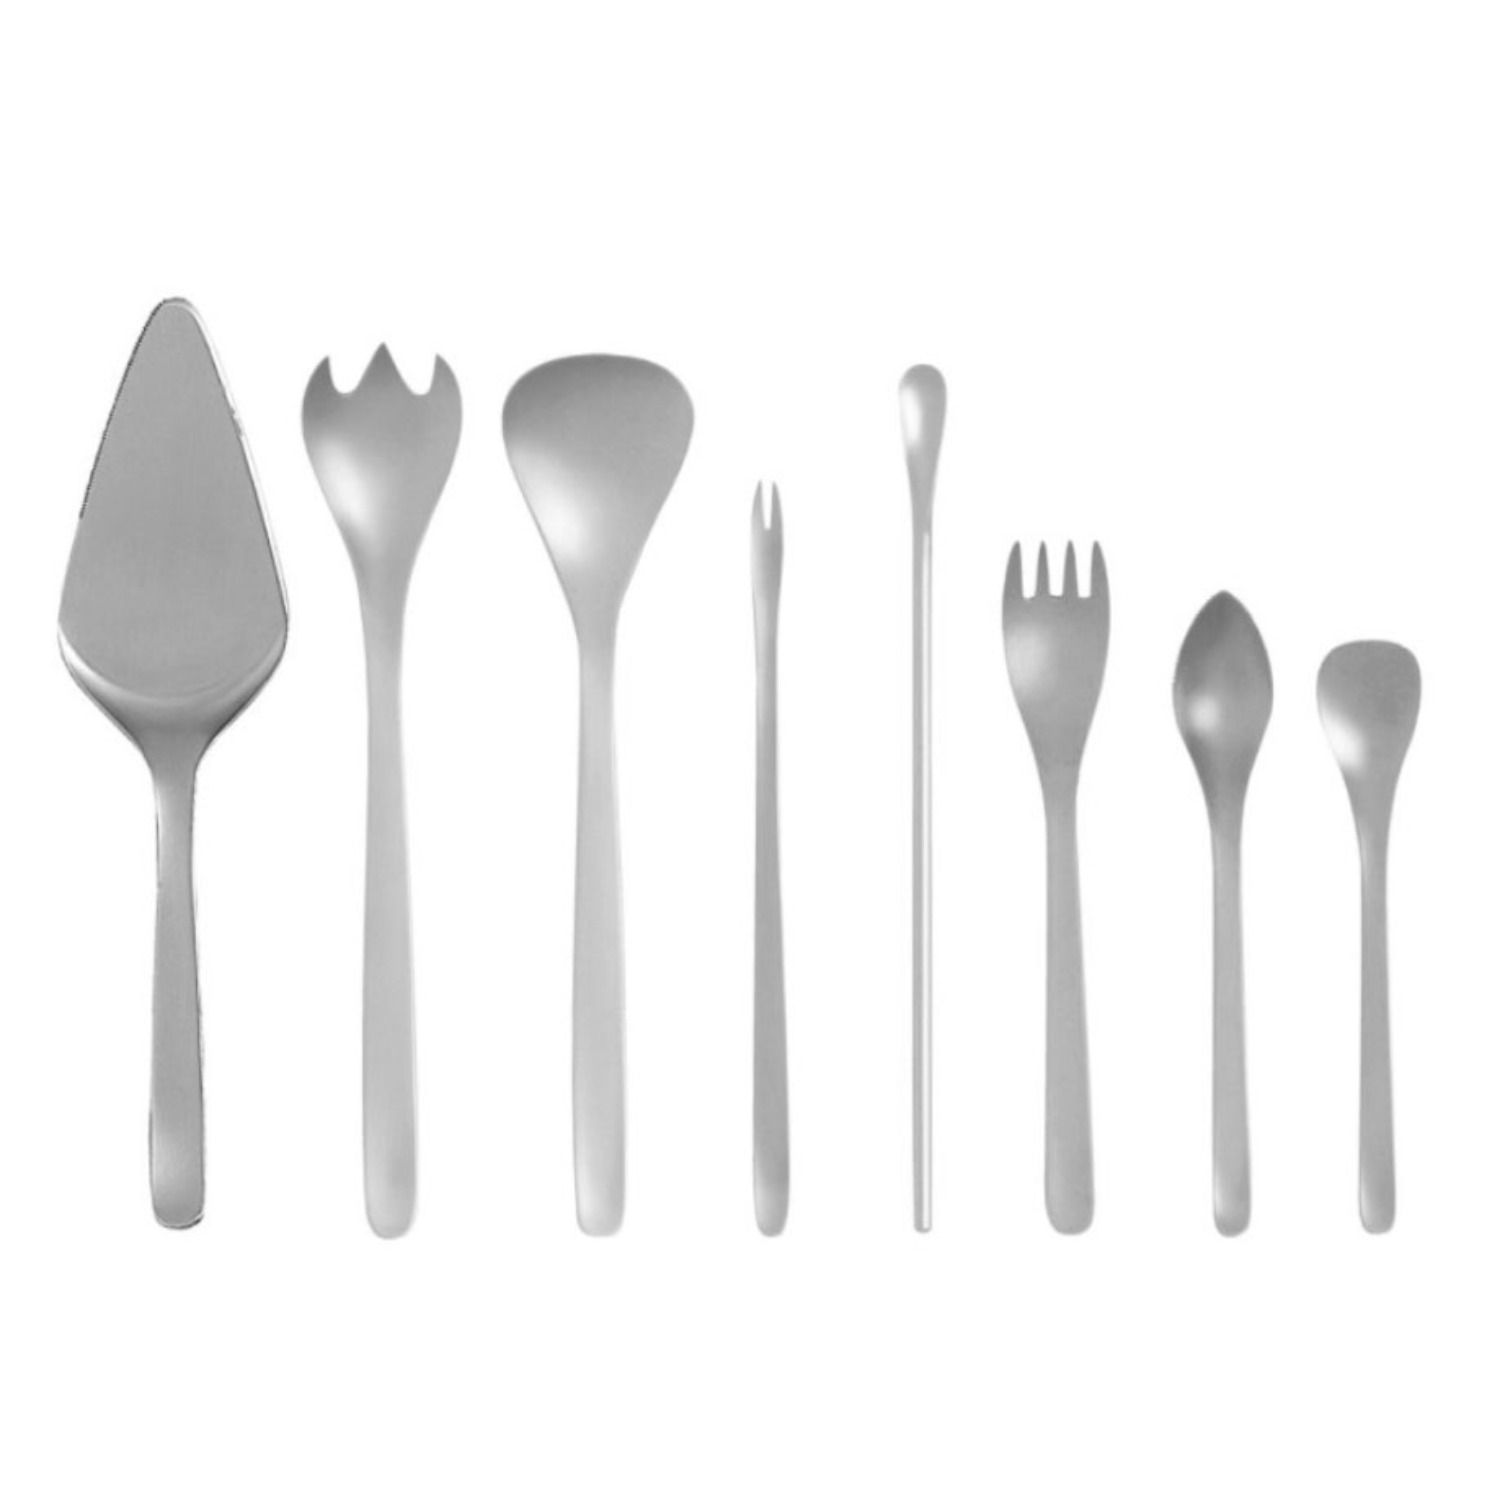 ﻿Stainless Steel Cutlery #1250, Utensils for specific foods